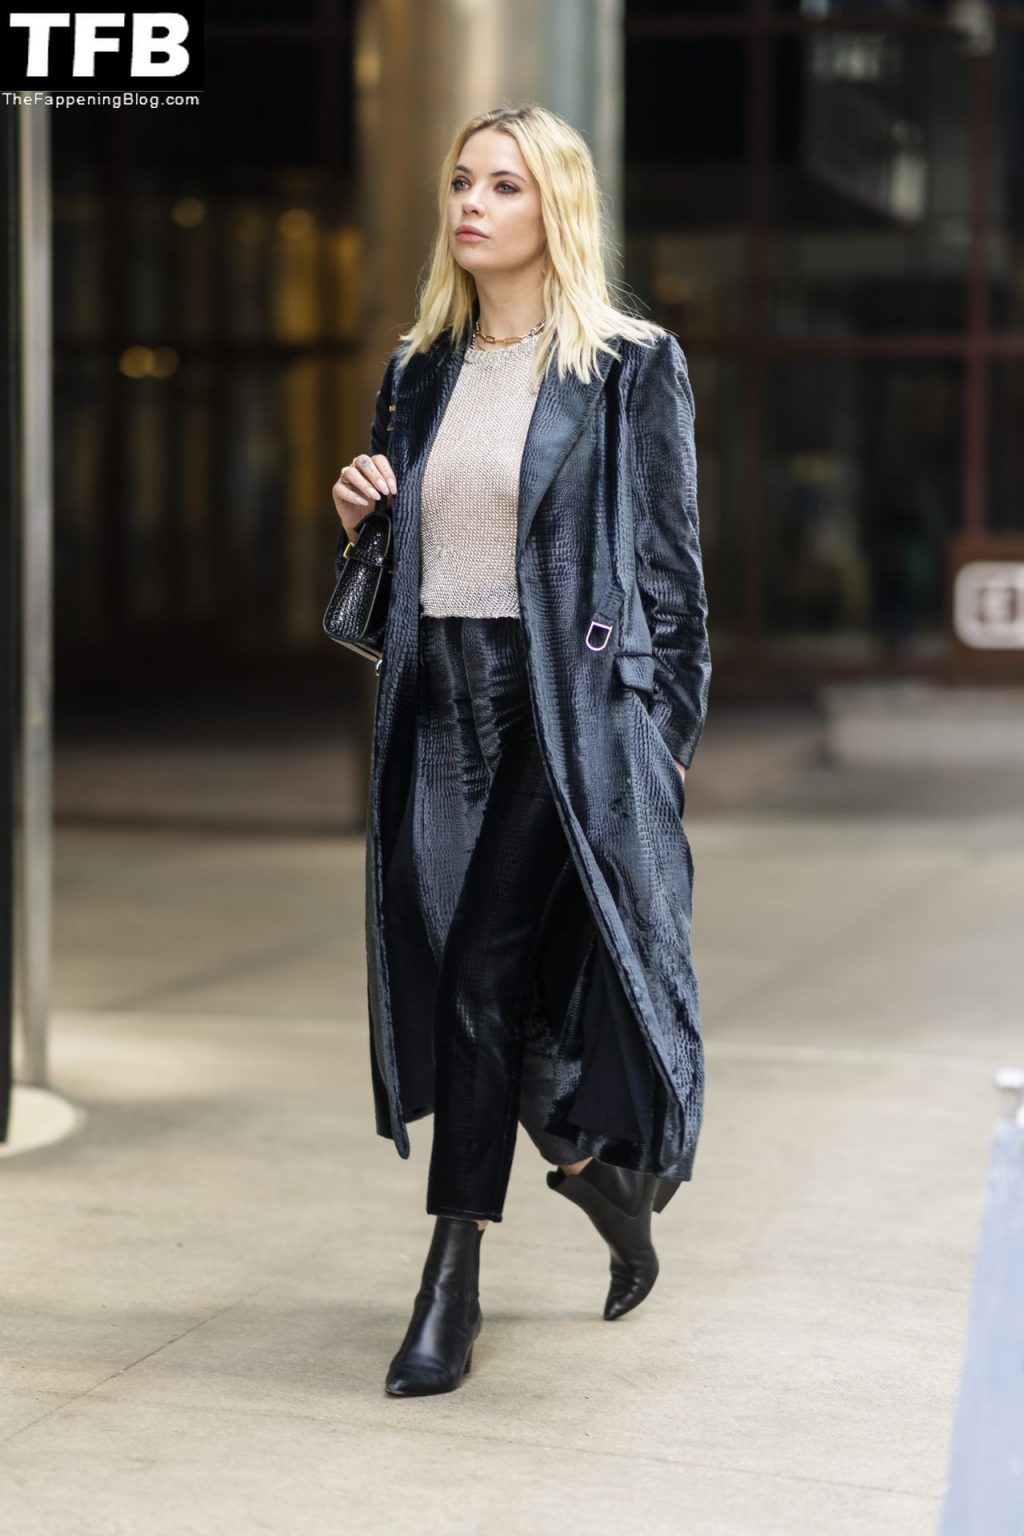 Ashley Benson Sexy The Fappening Blog 14 1024x1536 - Braless Ashley Benson Looks Stylish While Heading to a Meeting in NYC (20 Photos)